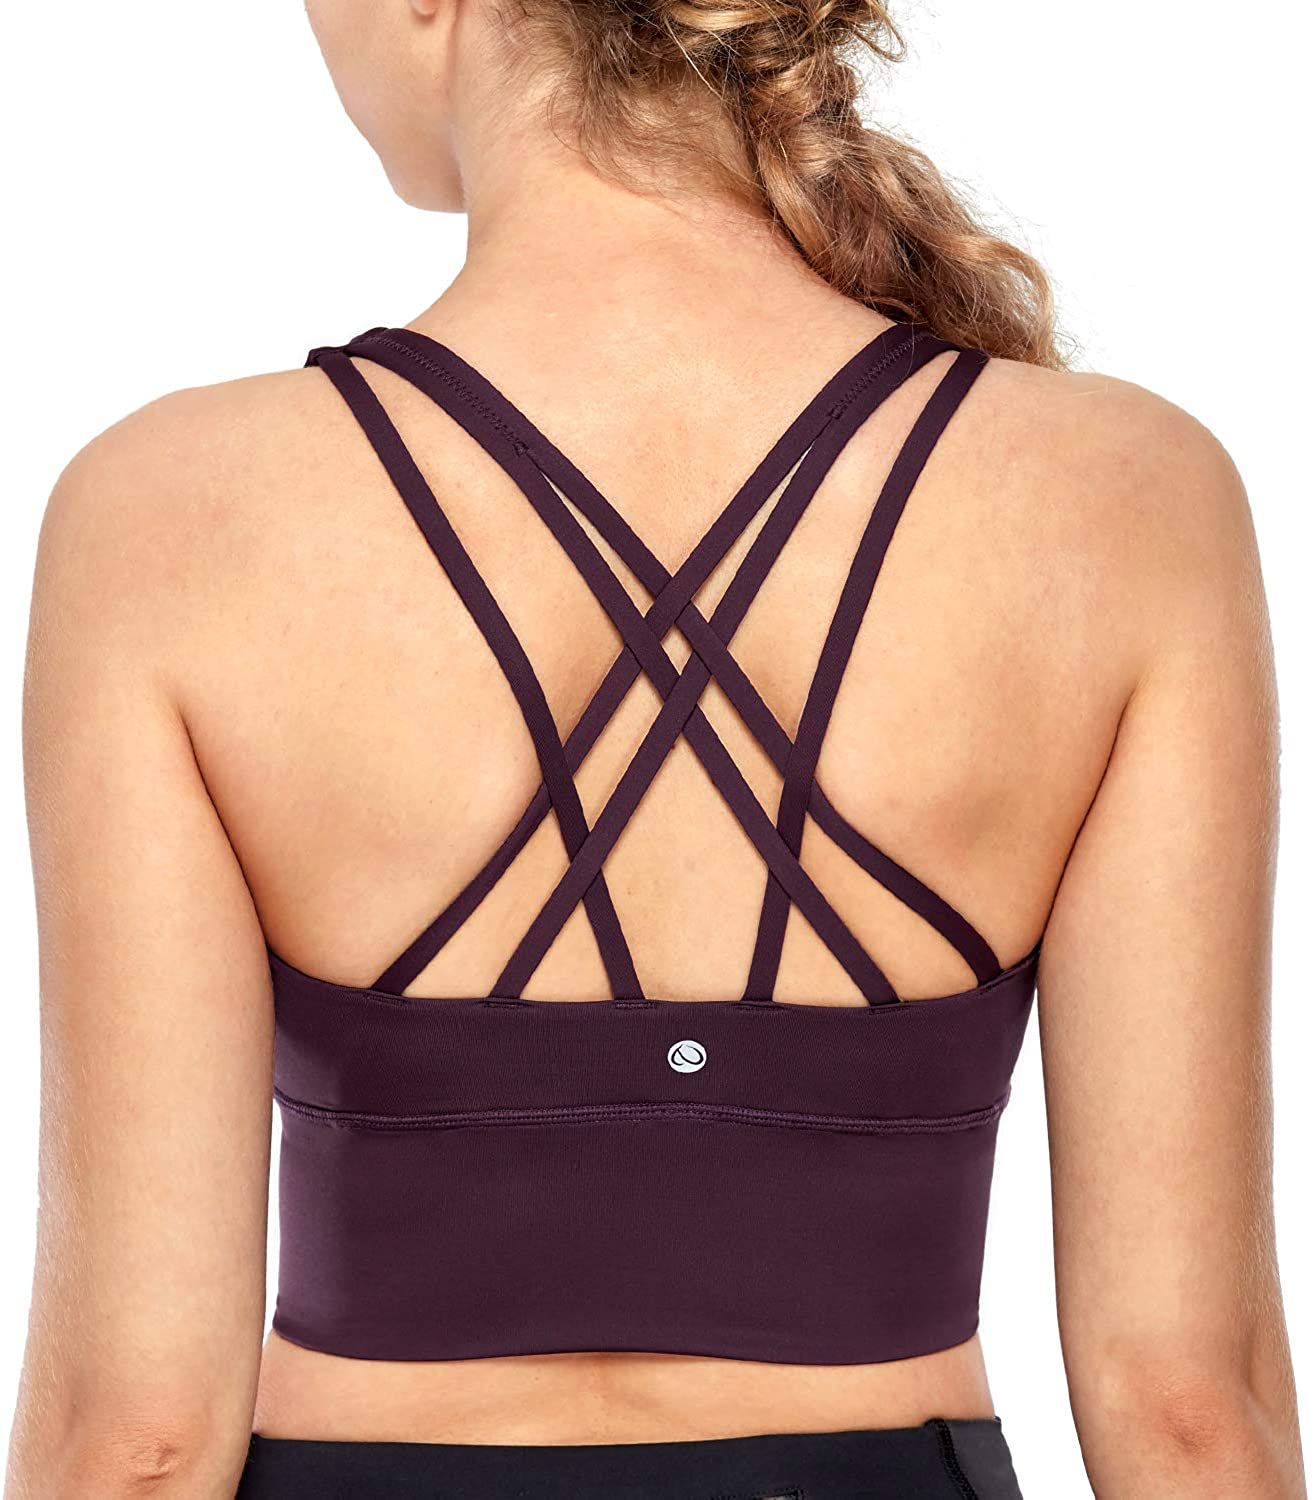 Price:$24.00 CRZ YOGA Strappy Sports Bras for Women Longline Wirefree Padded Medium Support Yoga Bra Top at Amazon Women’s Clothing store